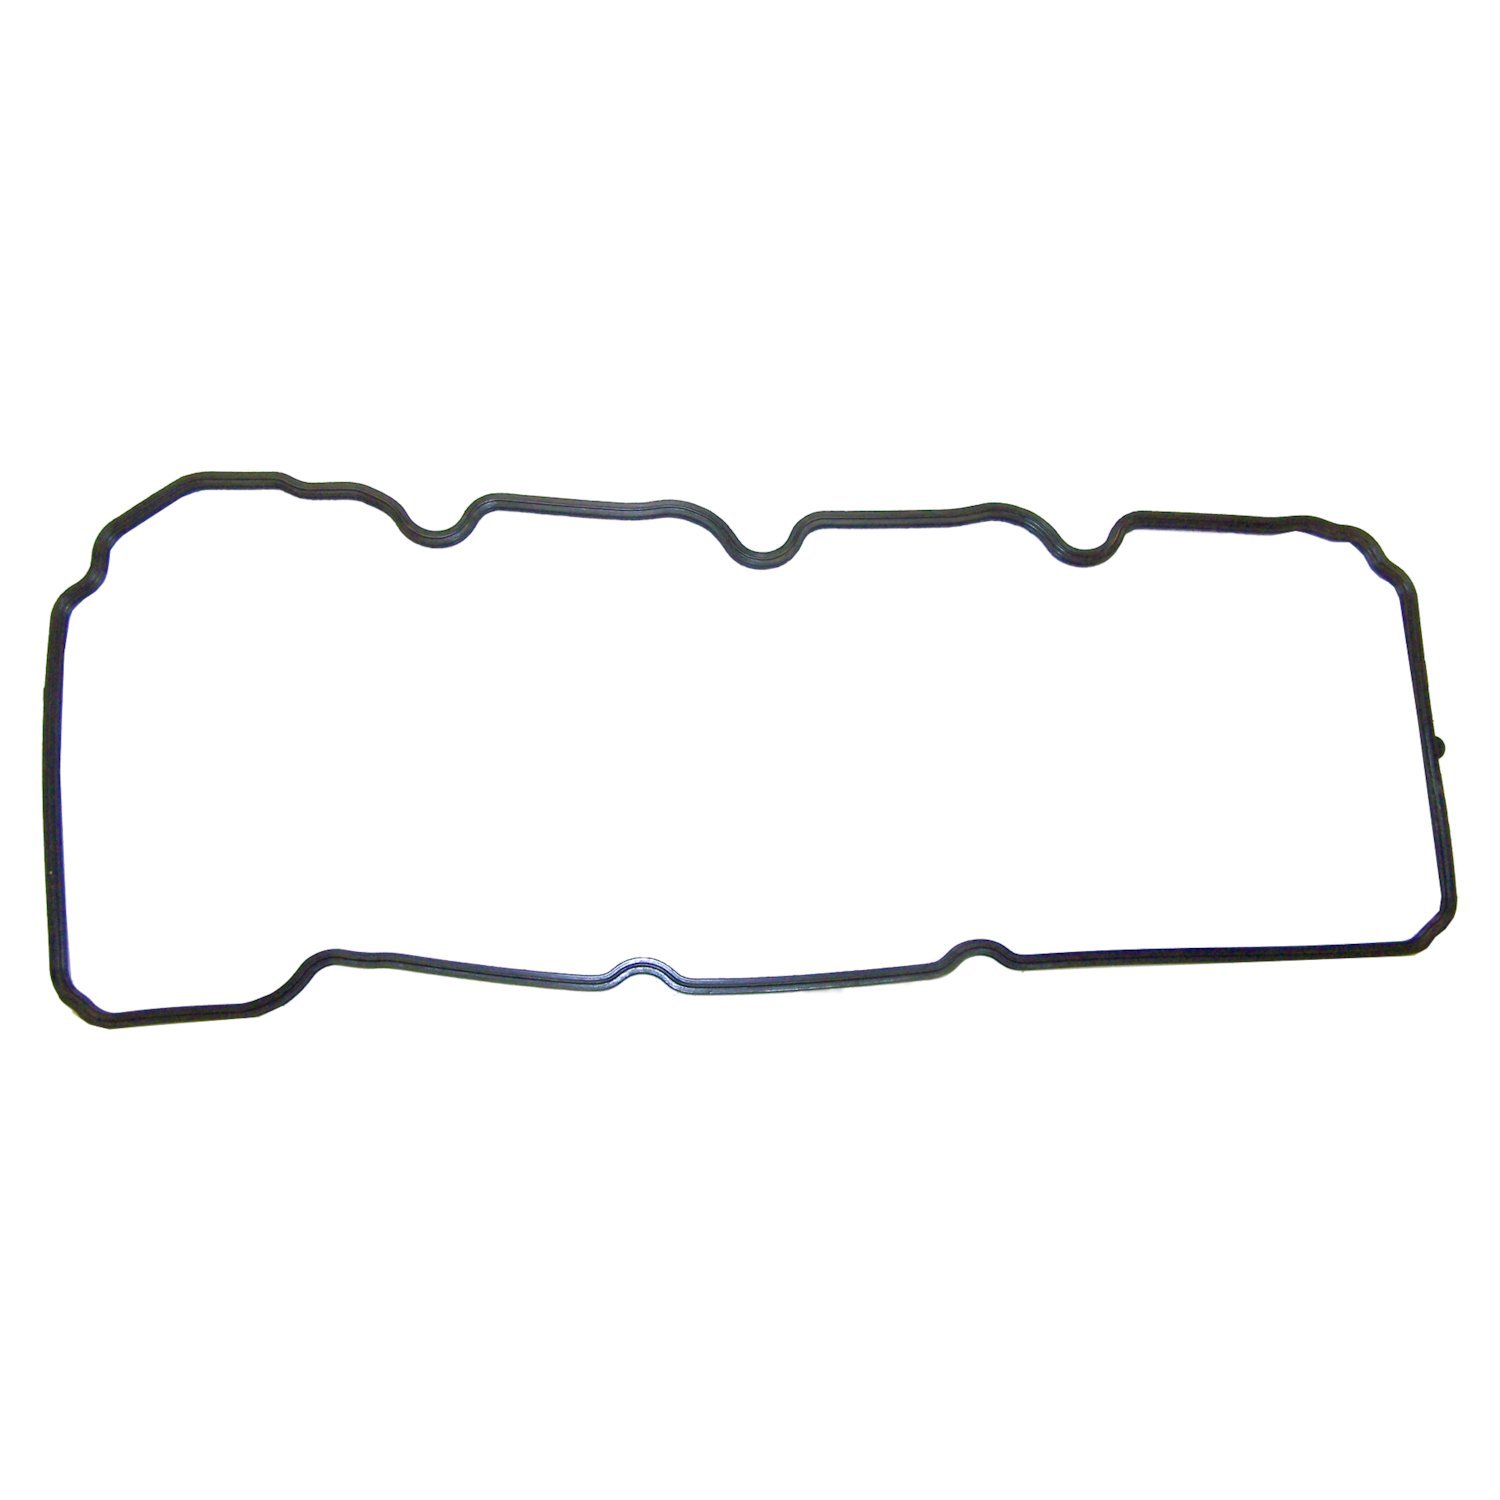 Right Valve Cover Gasket for Misc. 2005-12 Jeep, Dodge, Ram, Models w/ 3.7L Eng